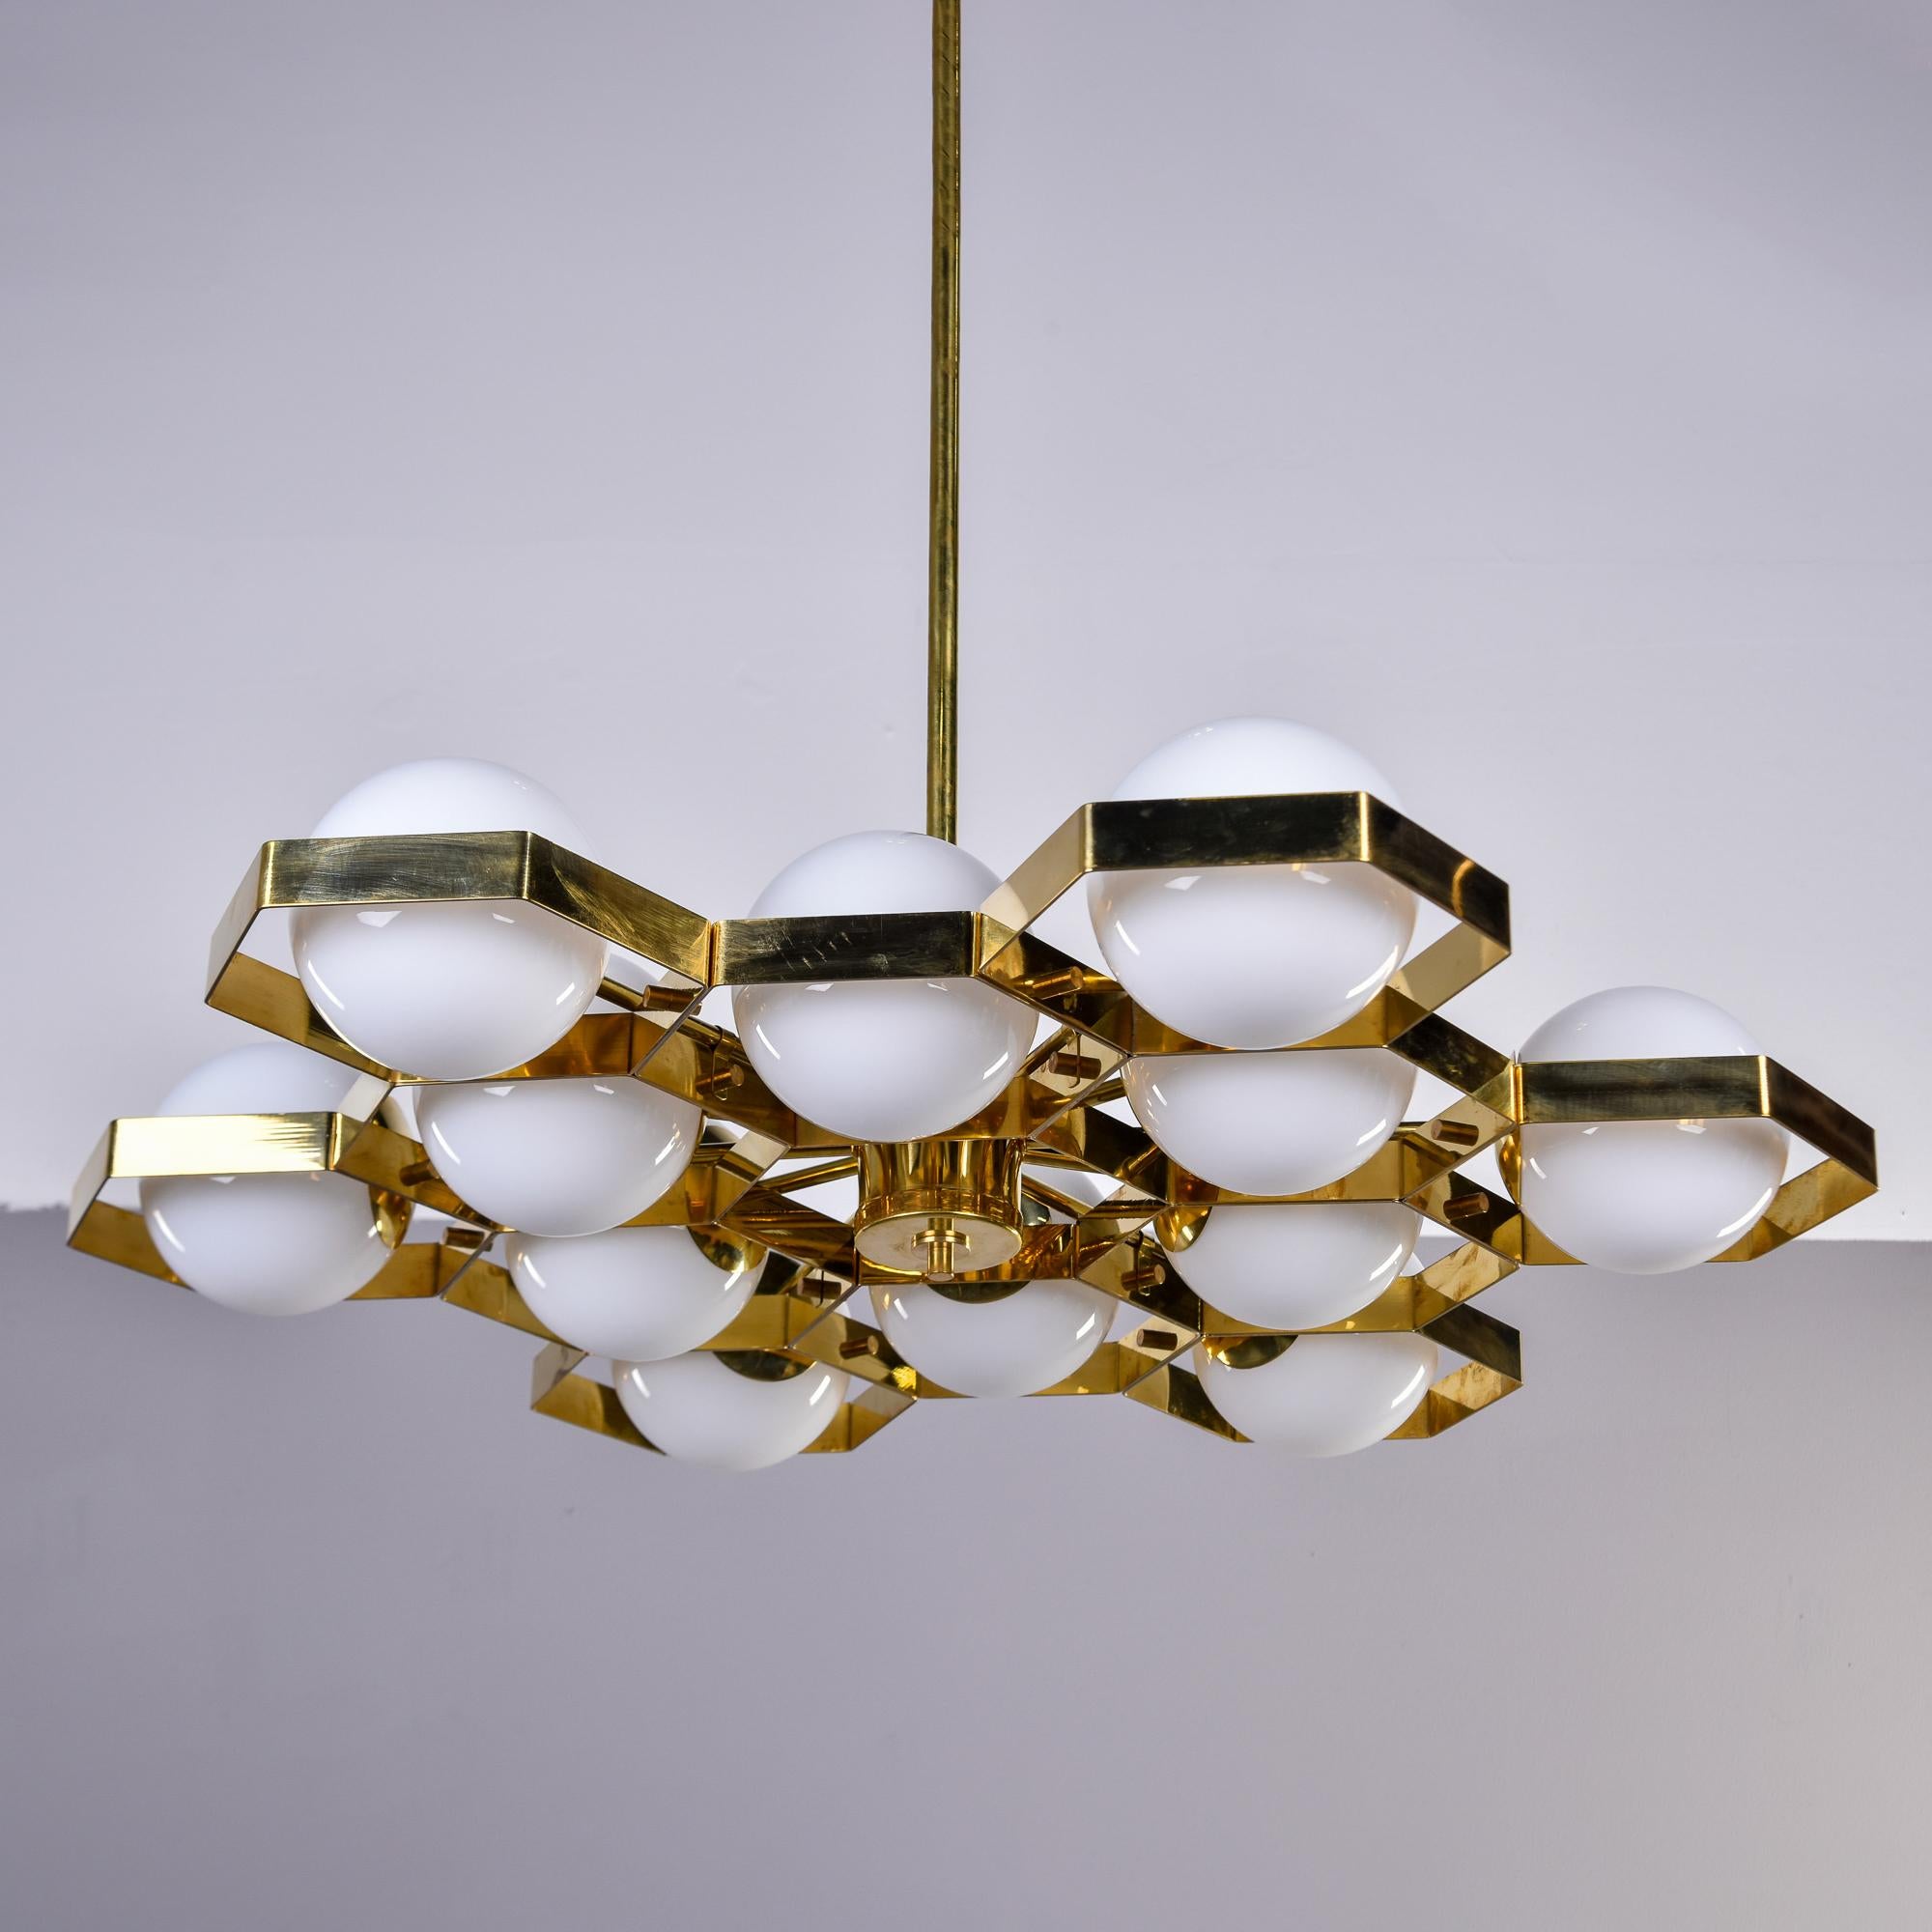 New and made for us in Italy, this 12 light fixture has a polished brass honeycomb-style frame with white glass globes. Each globe contains a single, candelabra style socket. Height shown includes brass suspension rod which can be shortened by your